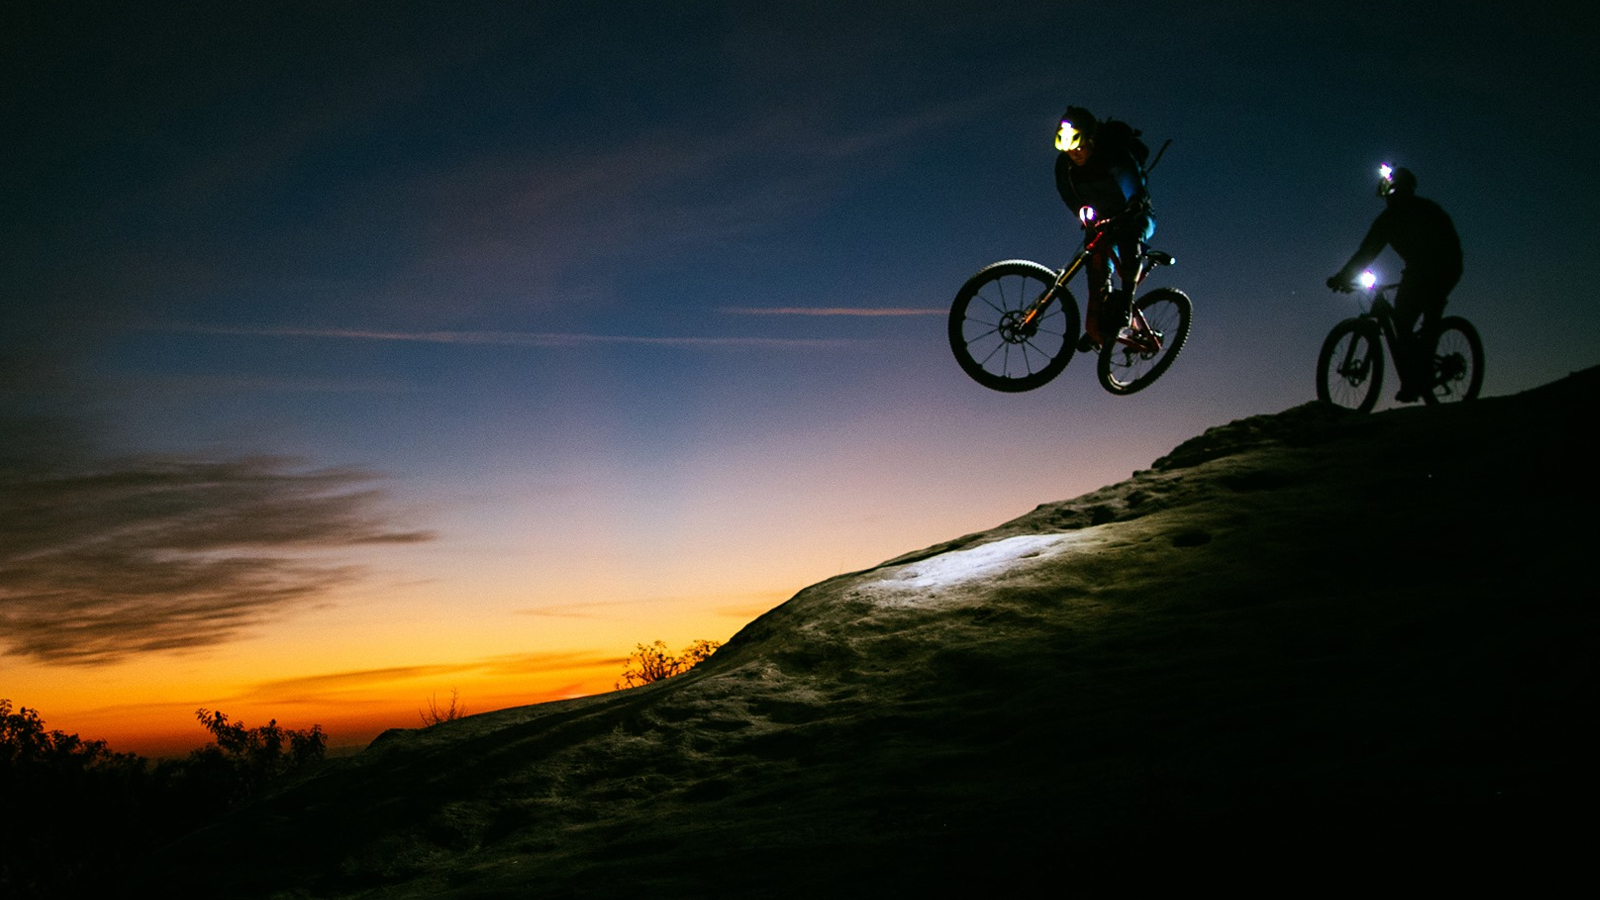 Best mountain bike lights the trails after dark with the most useful MTB lights | BikePerfect